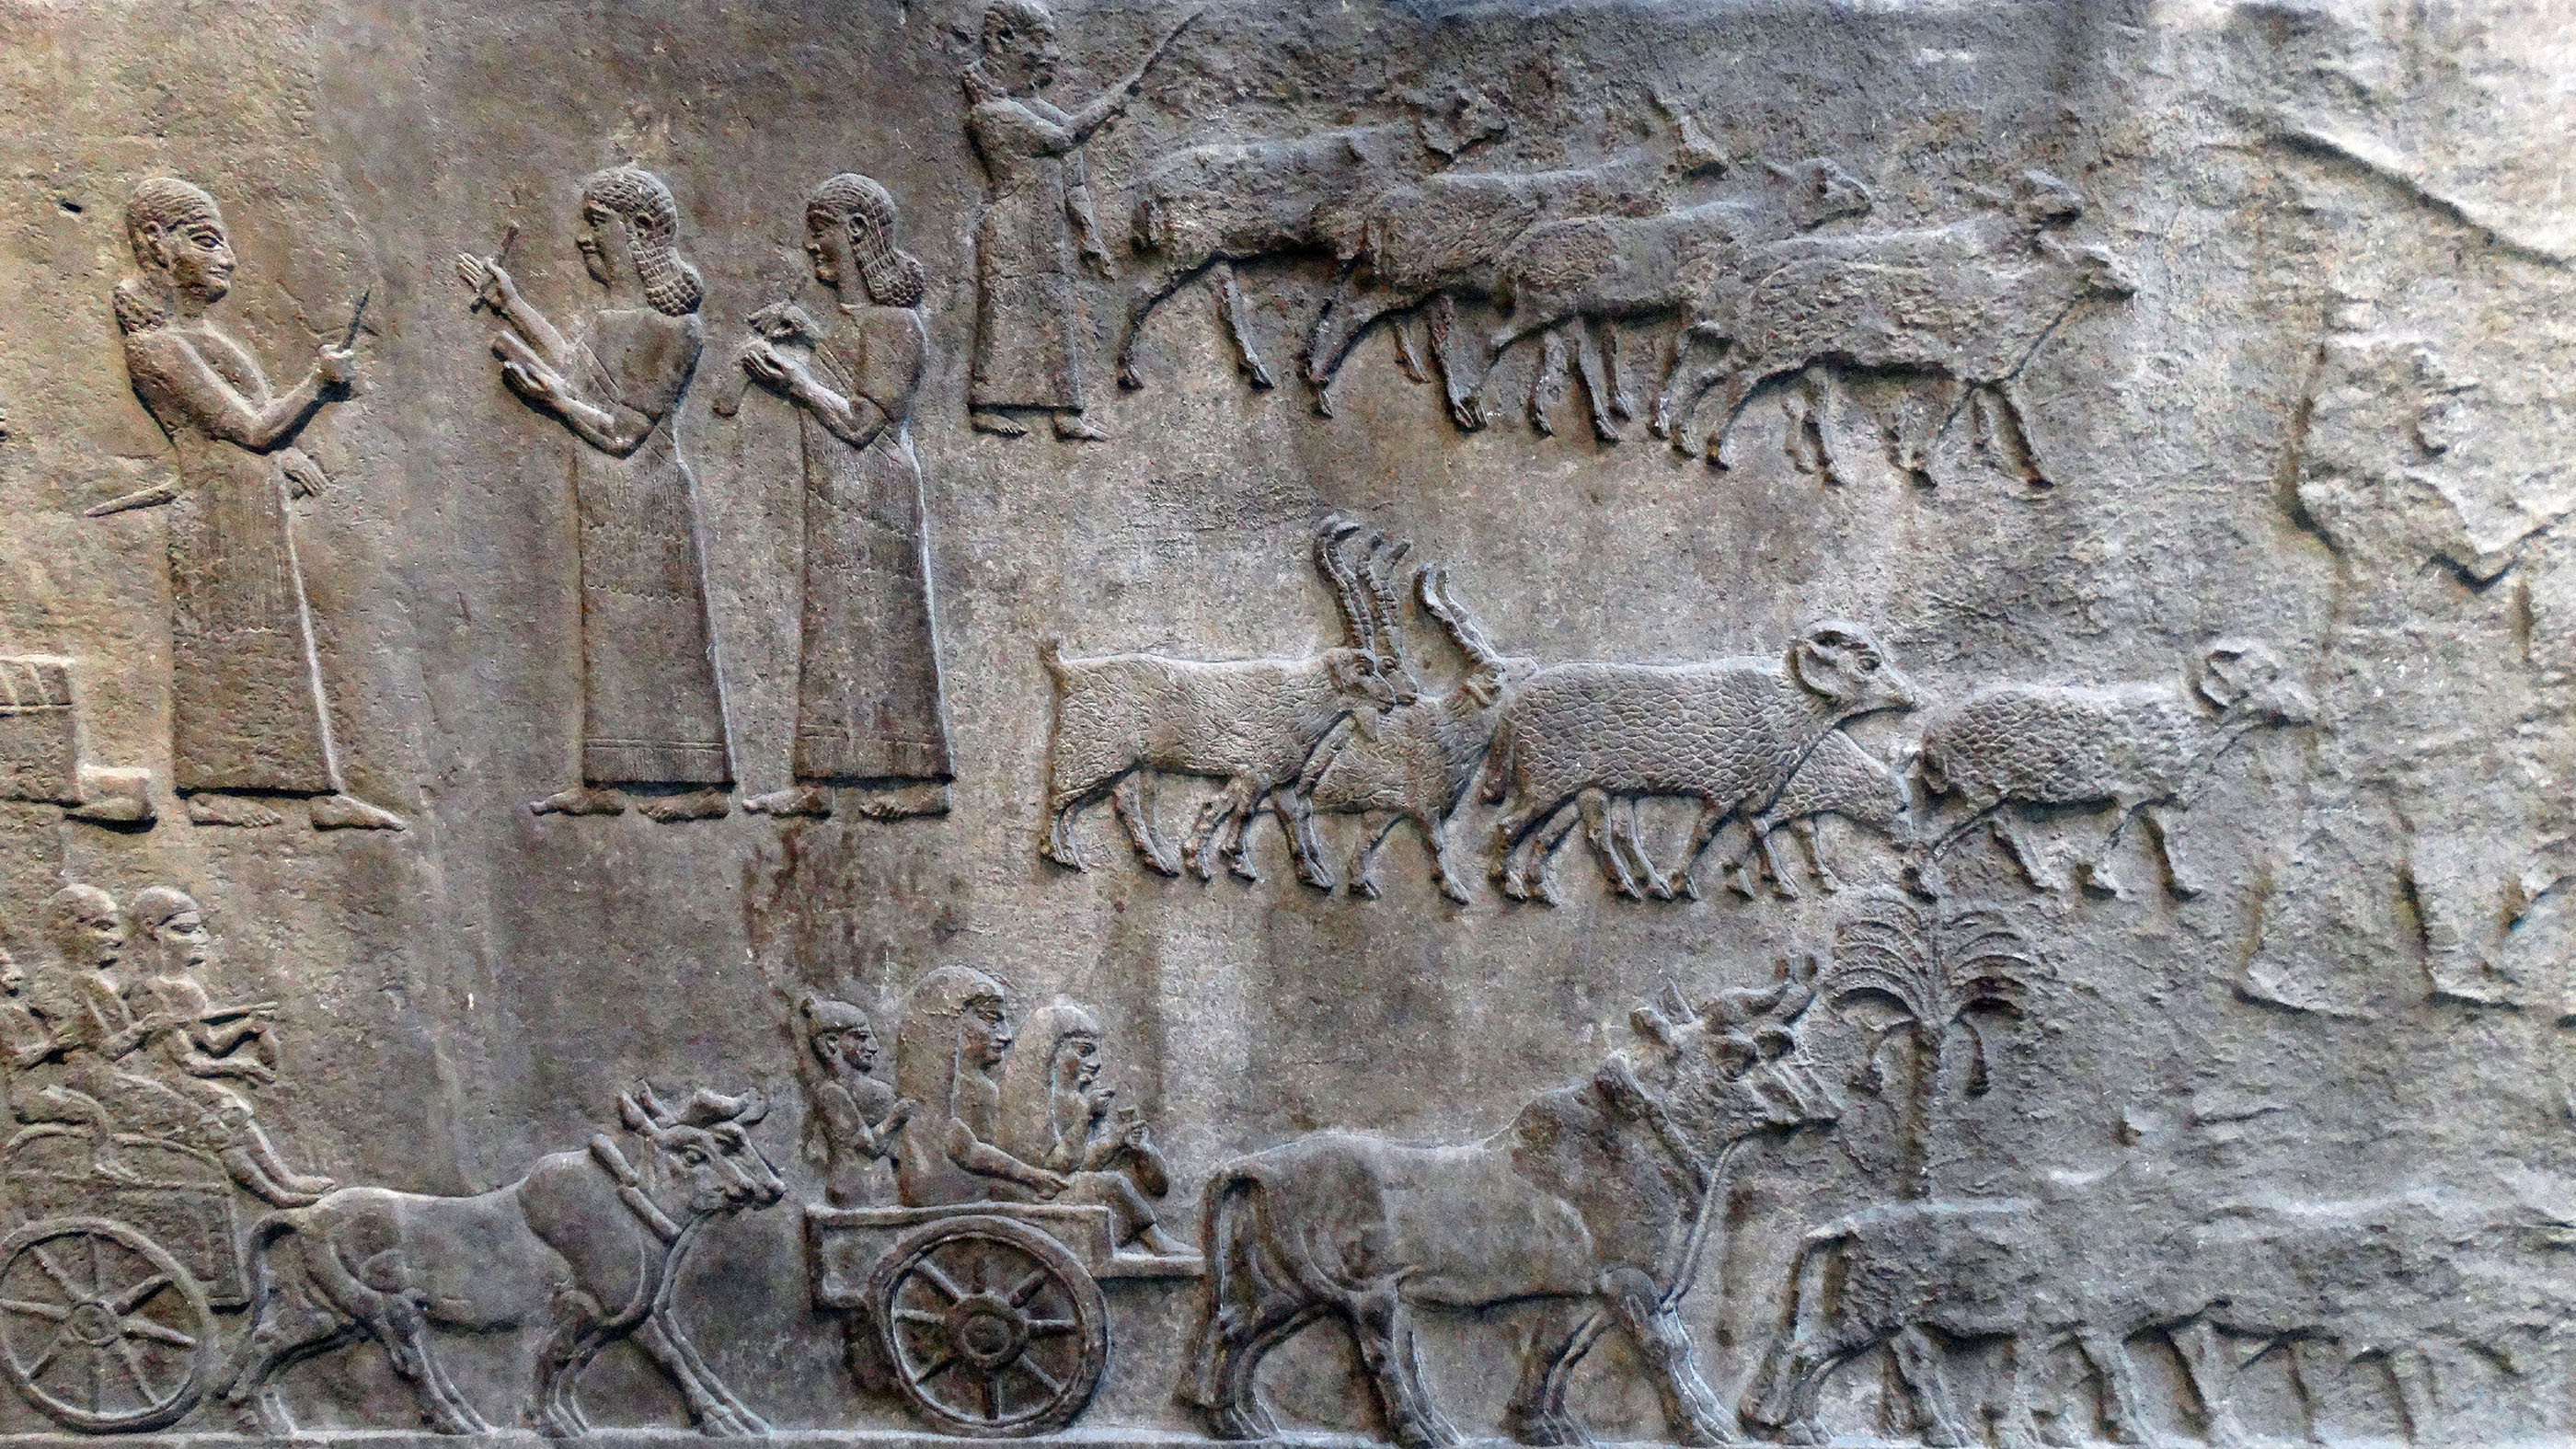 Here, one of a series of panels showing Tiglath-pileser III campaigns in southern Iraq.